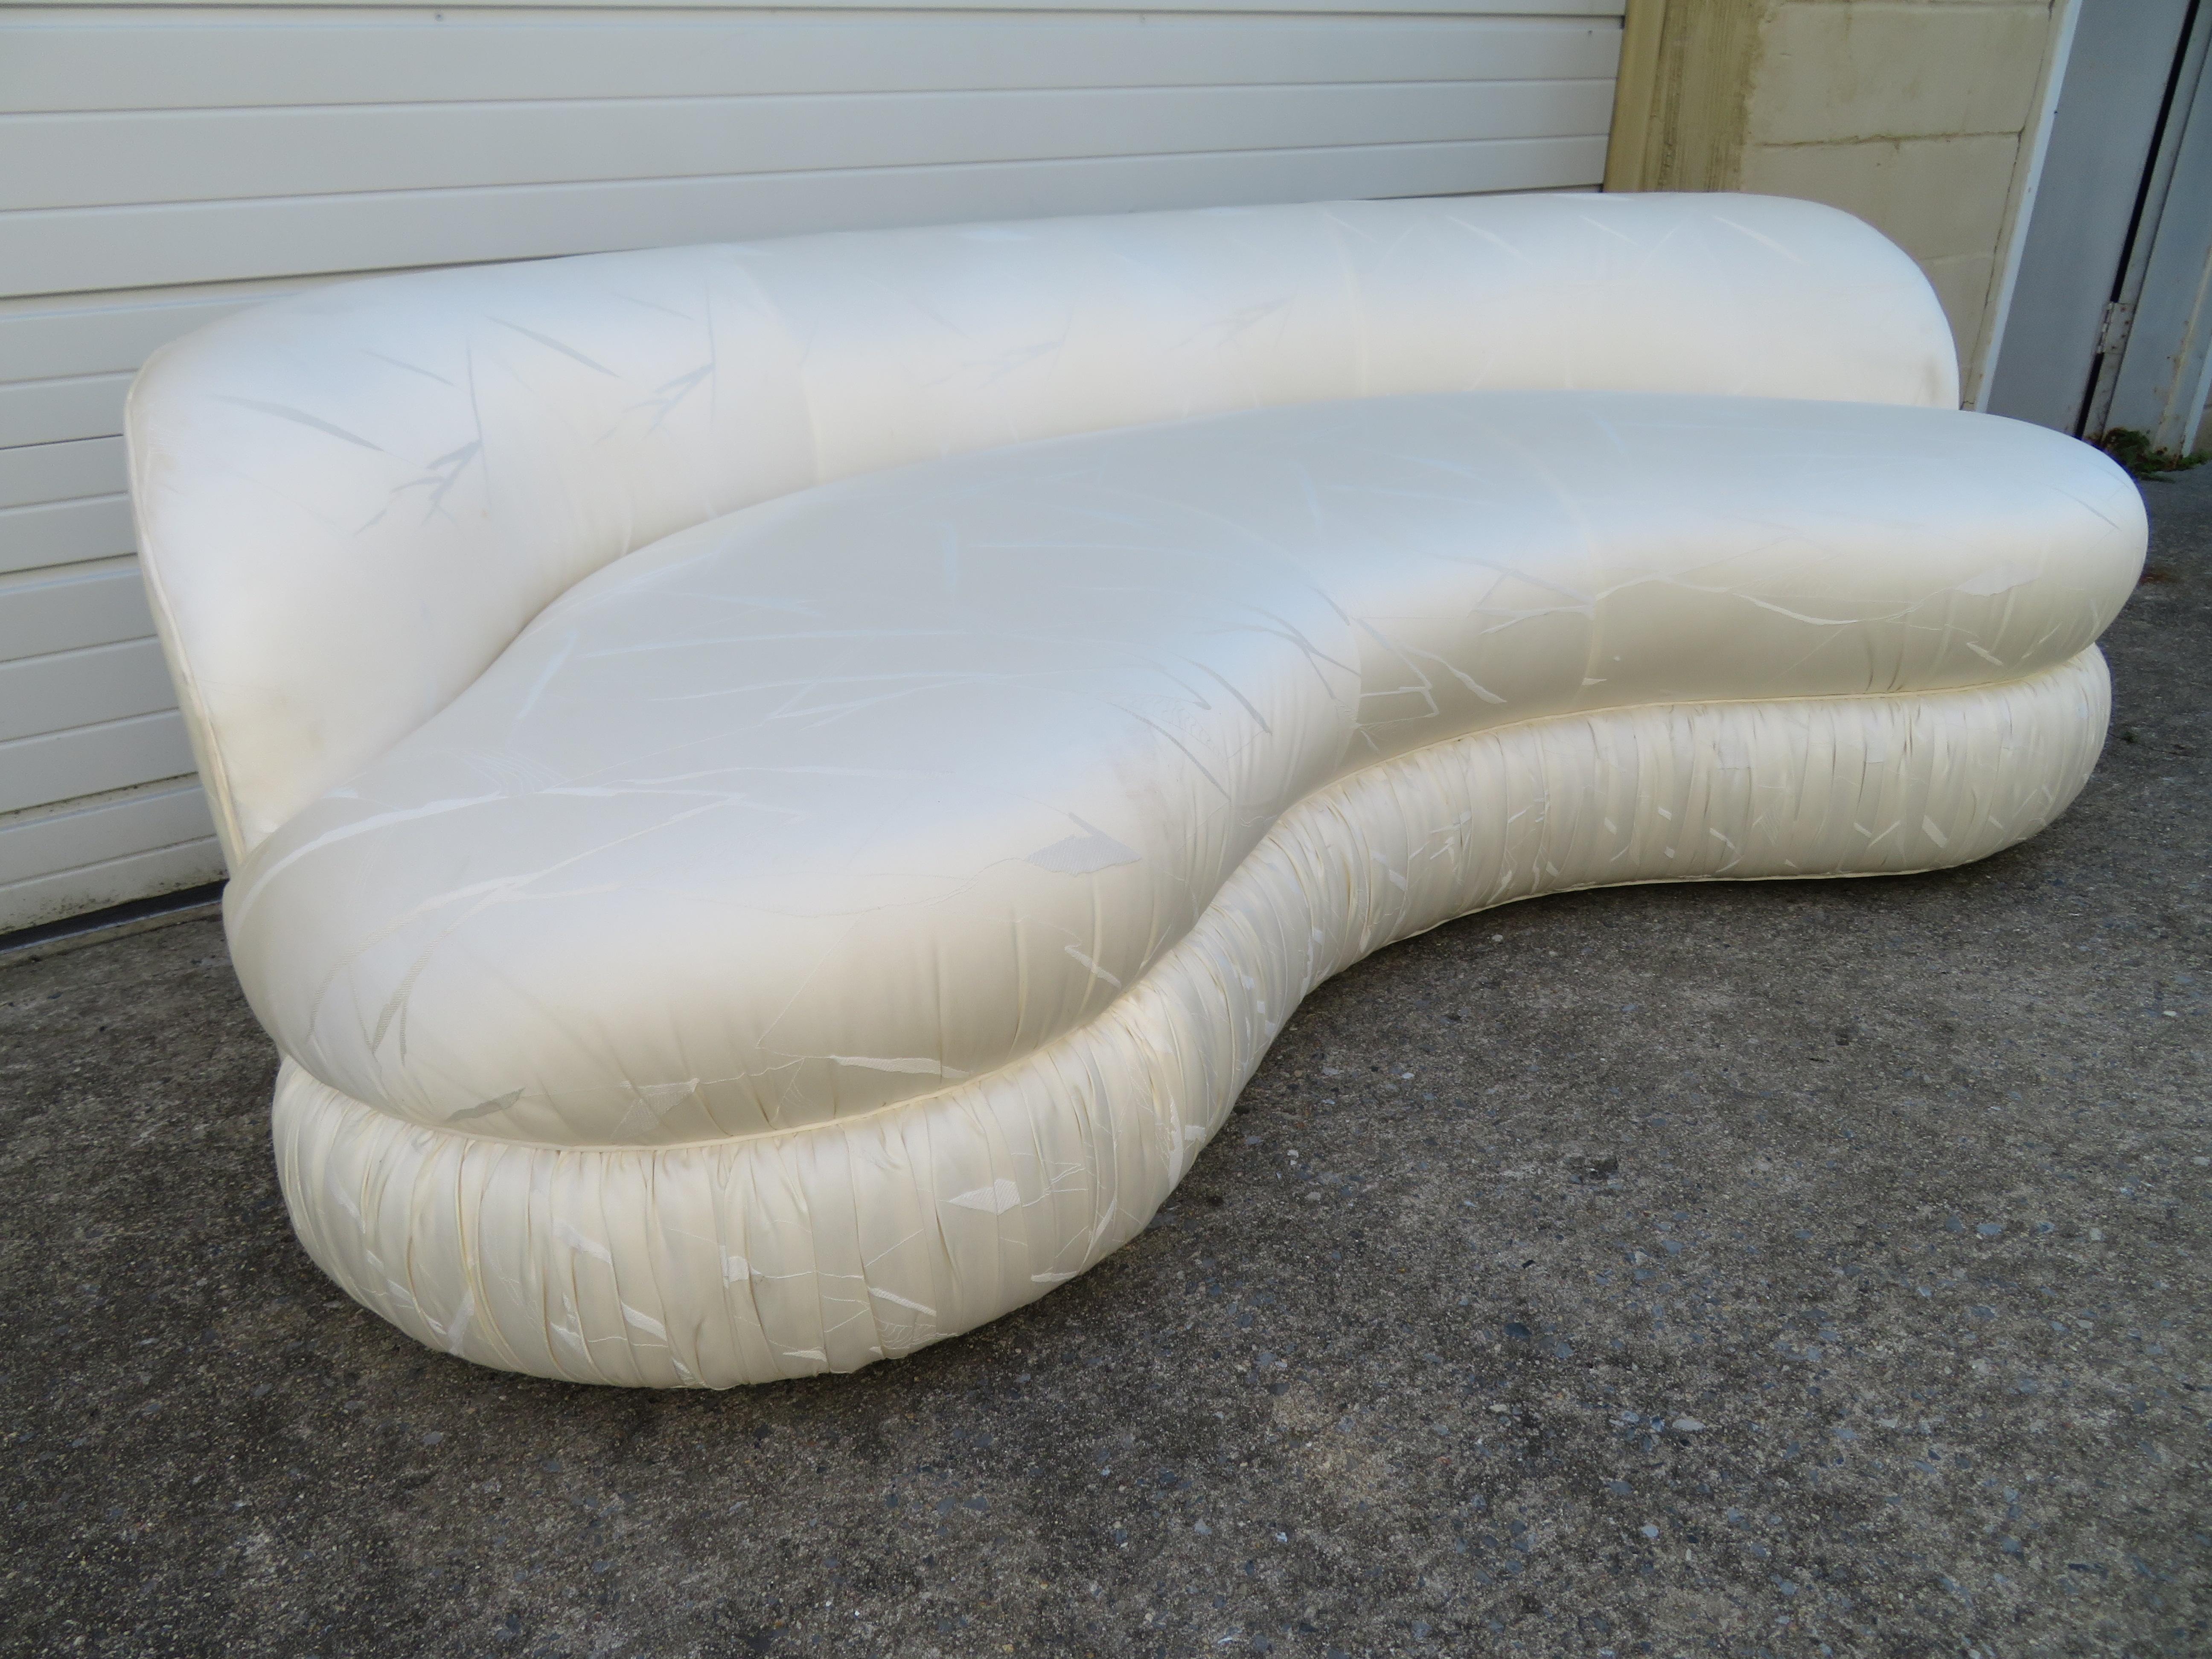 Stunning Pair of Curved Kidney Shaped Sofa Midcentury In Good Condition For Sale In Pemberton, NJ